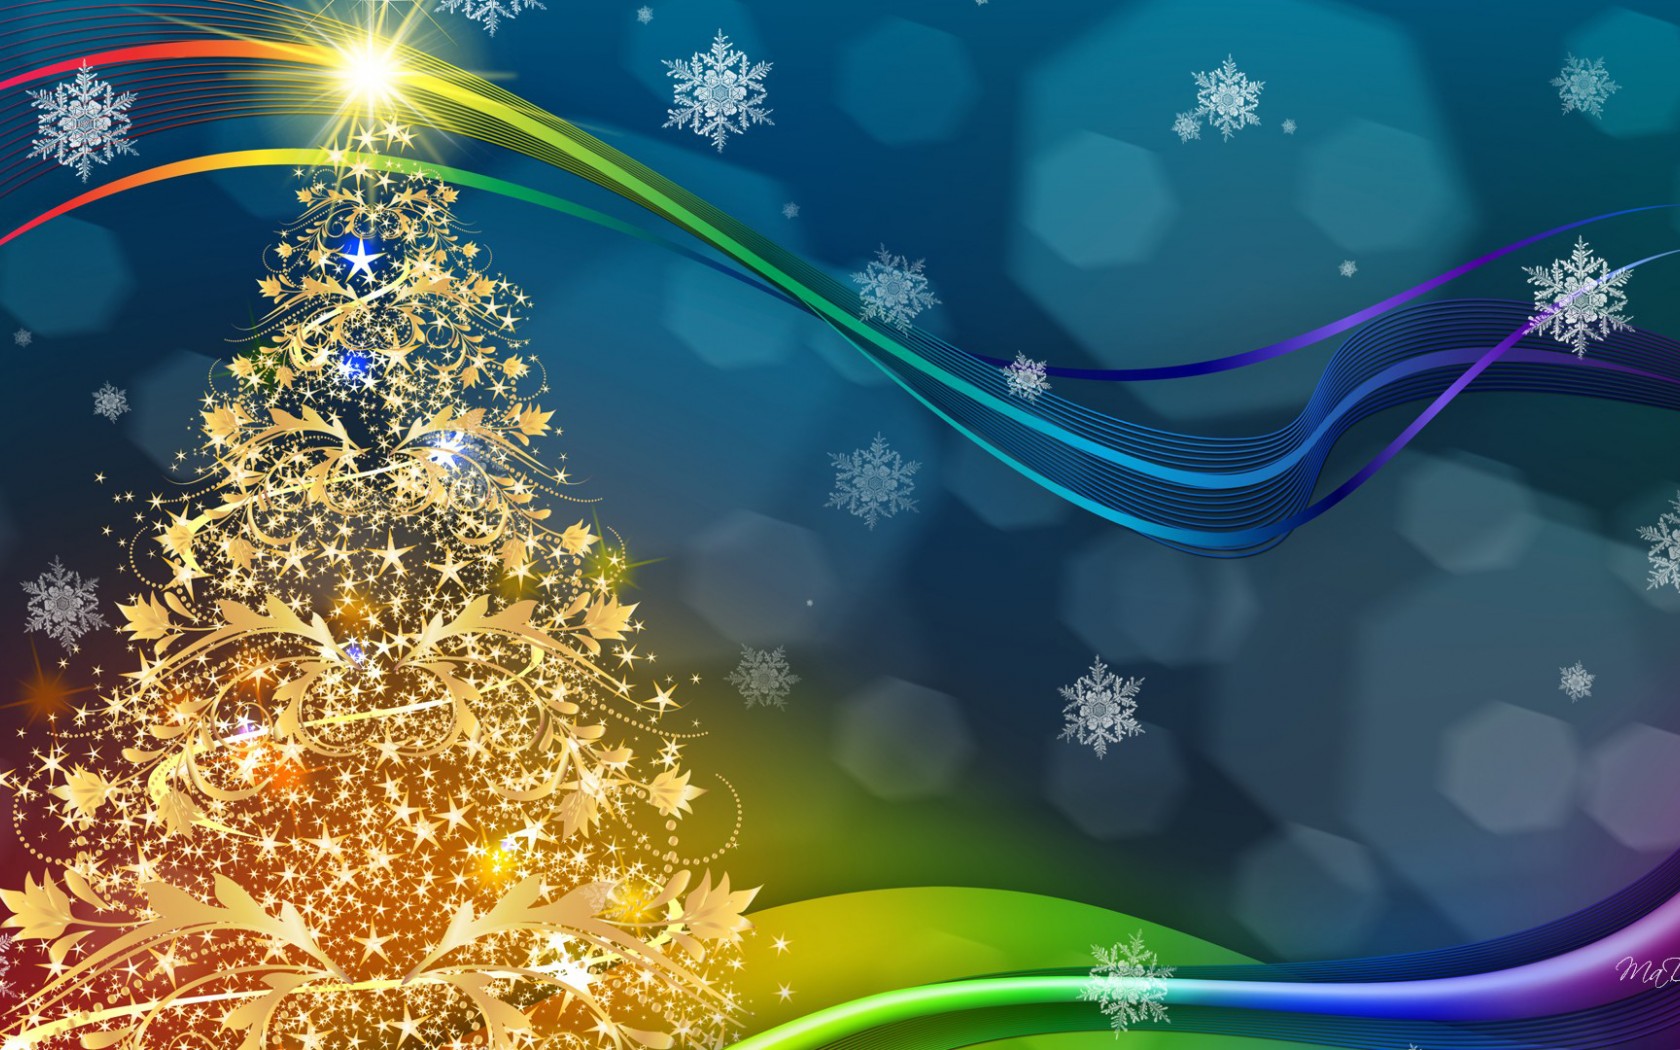 uhd wallpaper download,sky,graphic design,tree,pattern,christmas eve